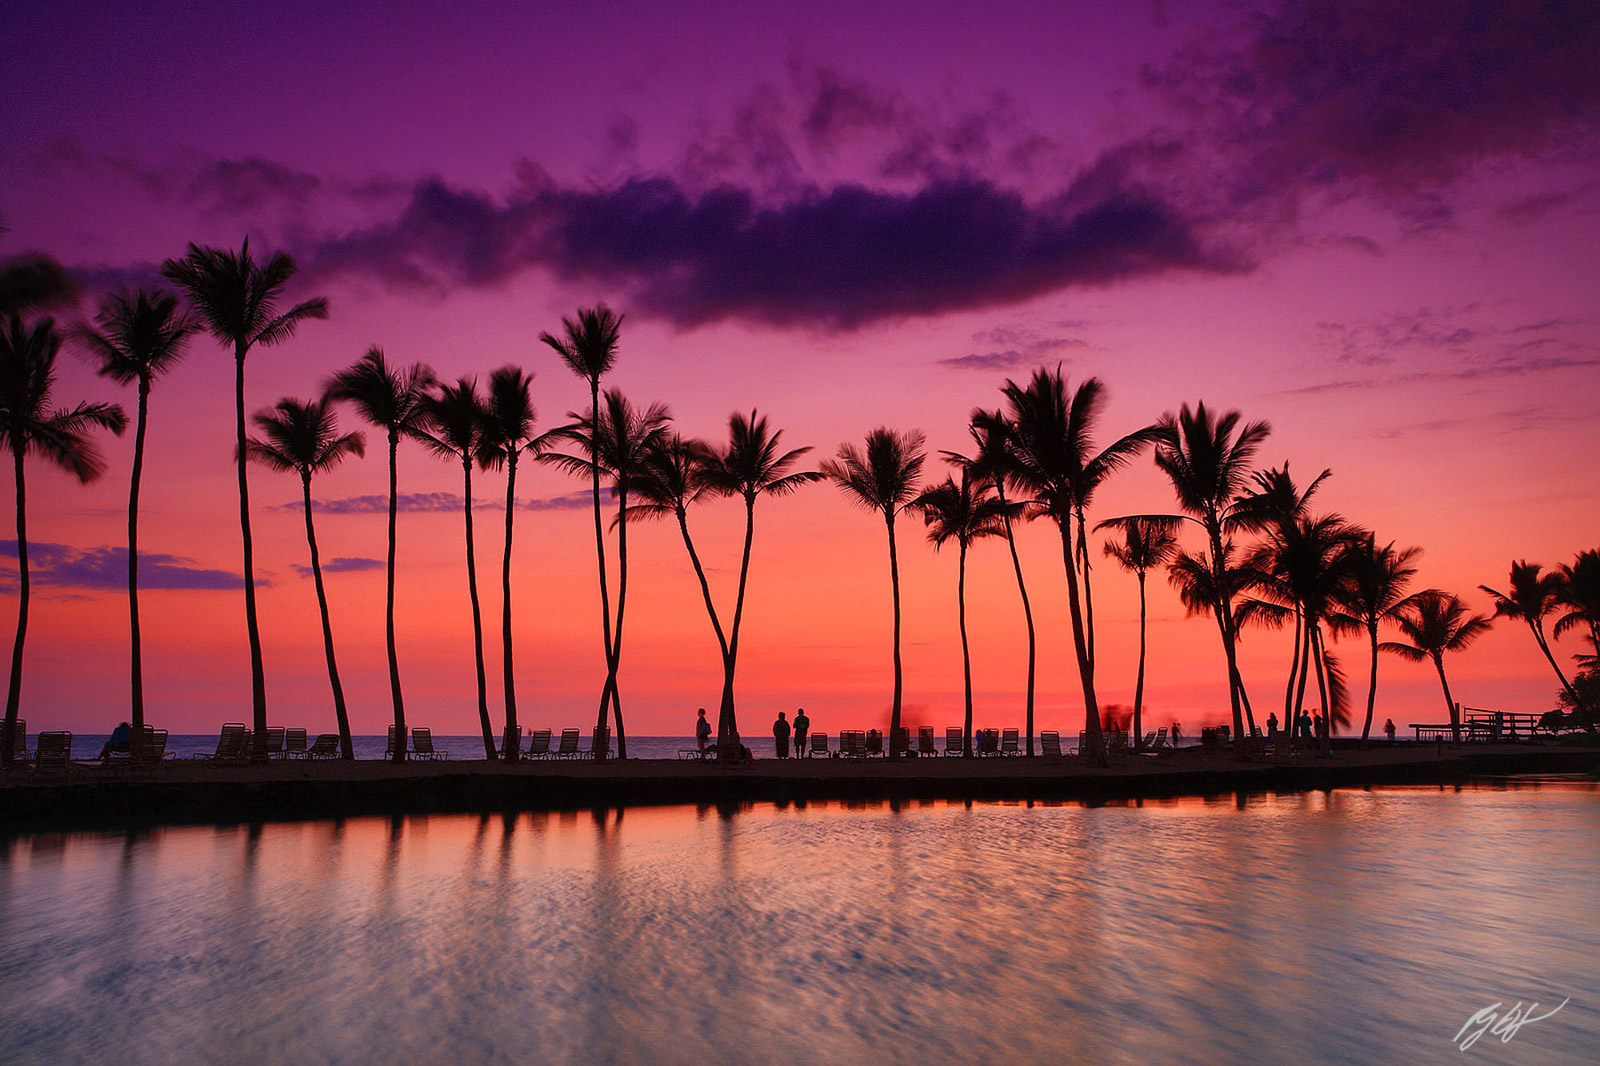 Sunset and Palm Trees from the Big Island of Hawaii